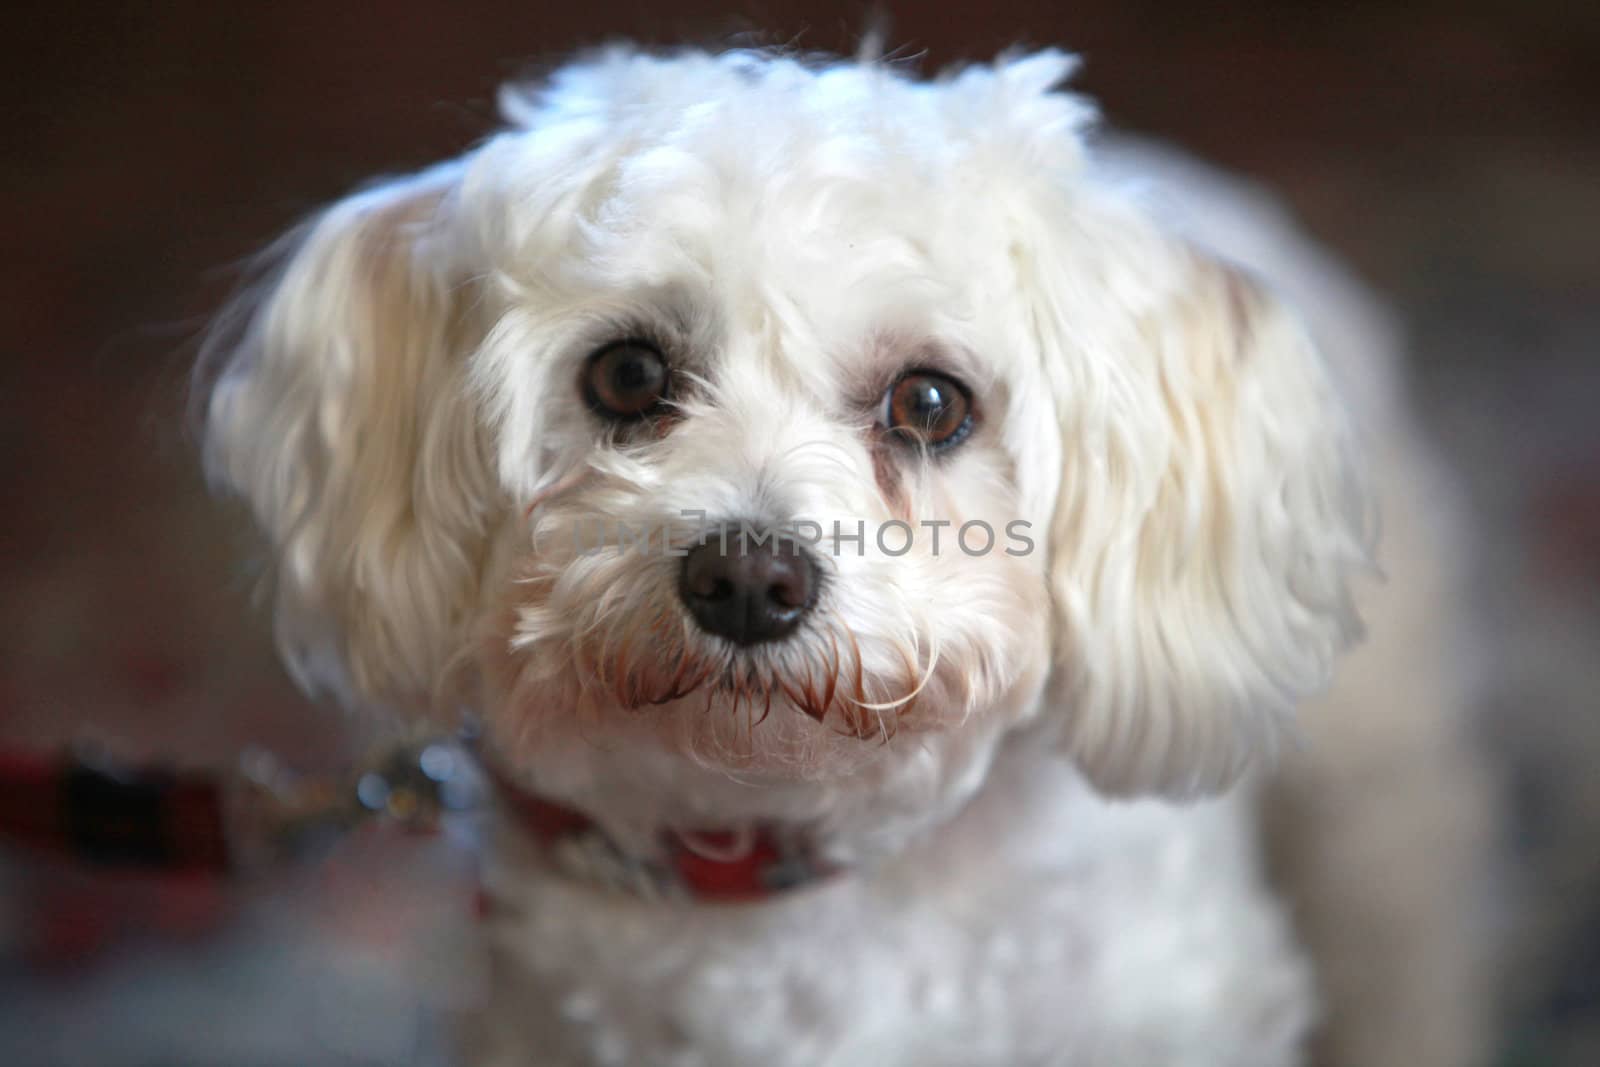 small, cute, white dog looks into the camera - close-up